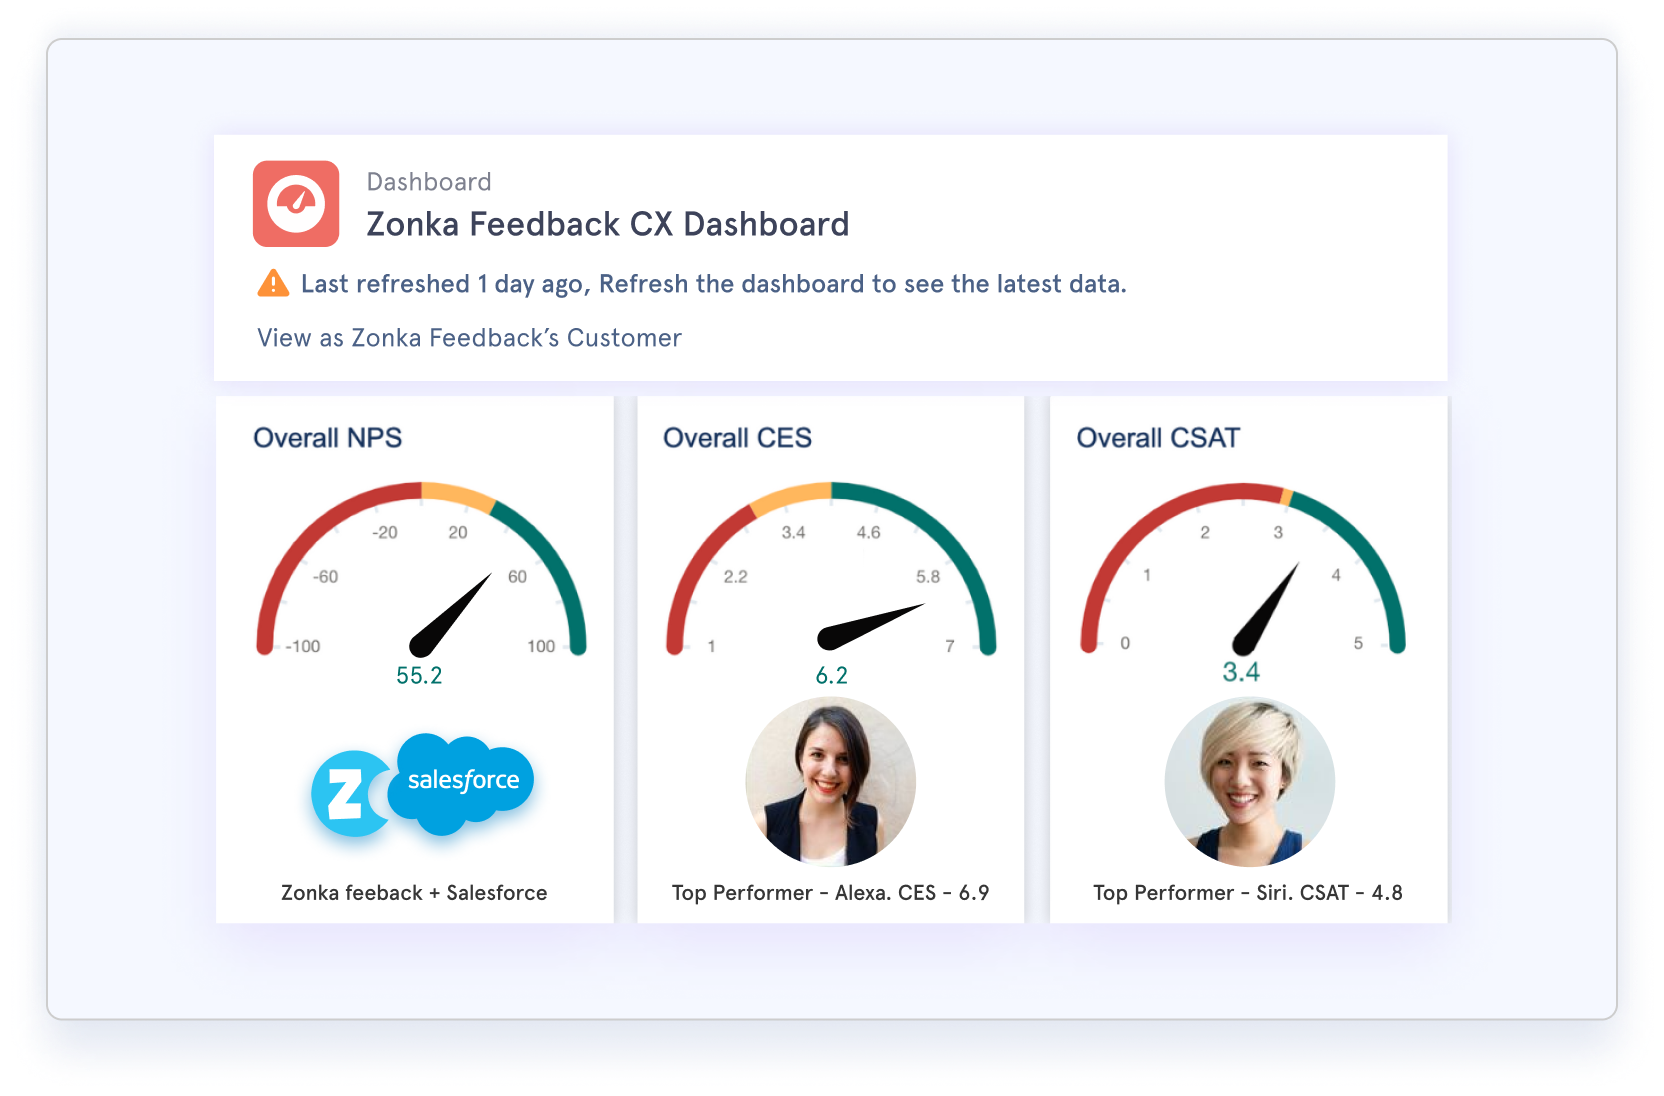 salesforce surveys CSAT, CES, and NPS reports on dashboard